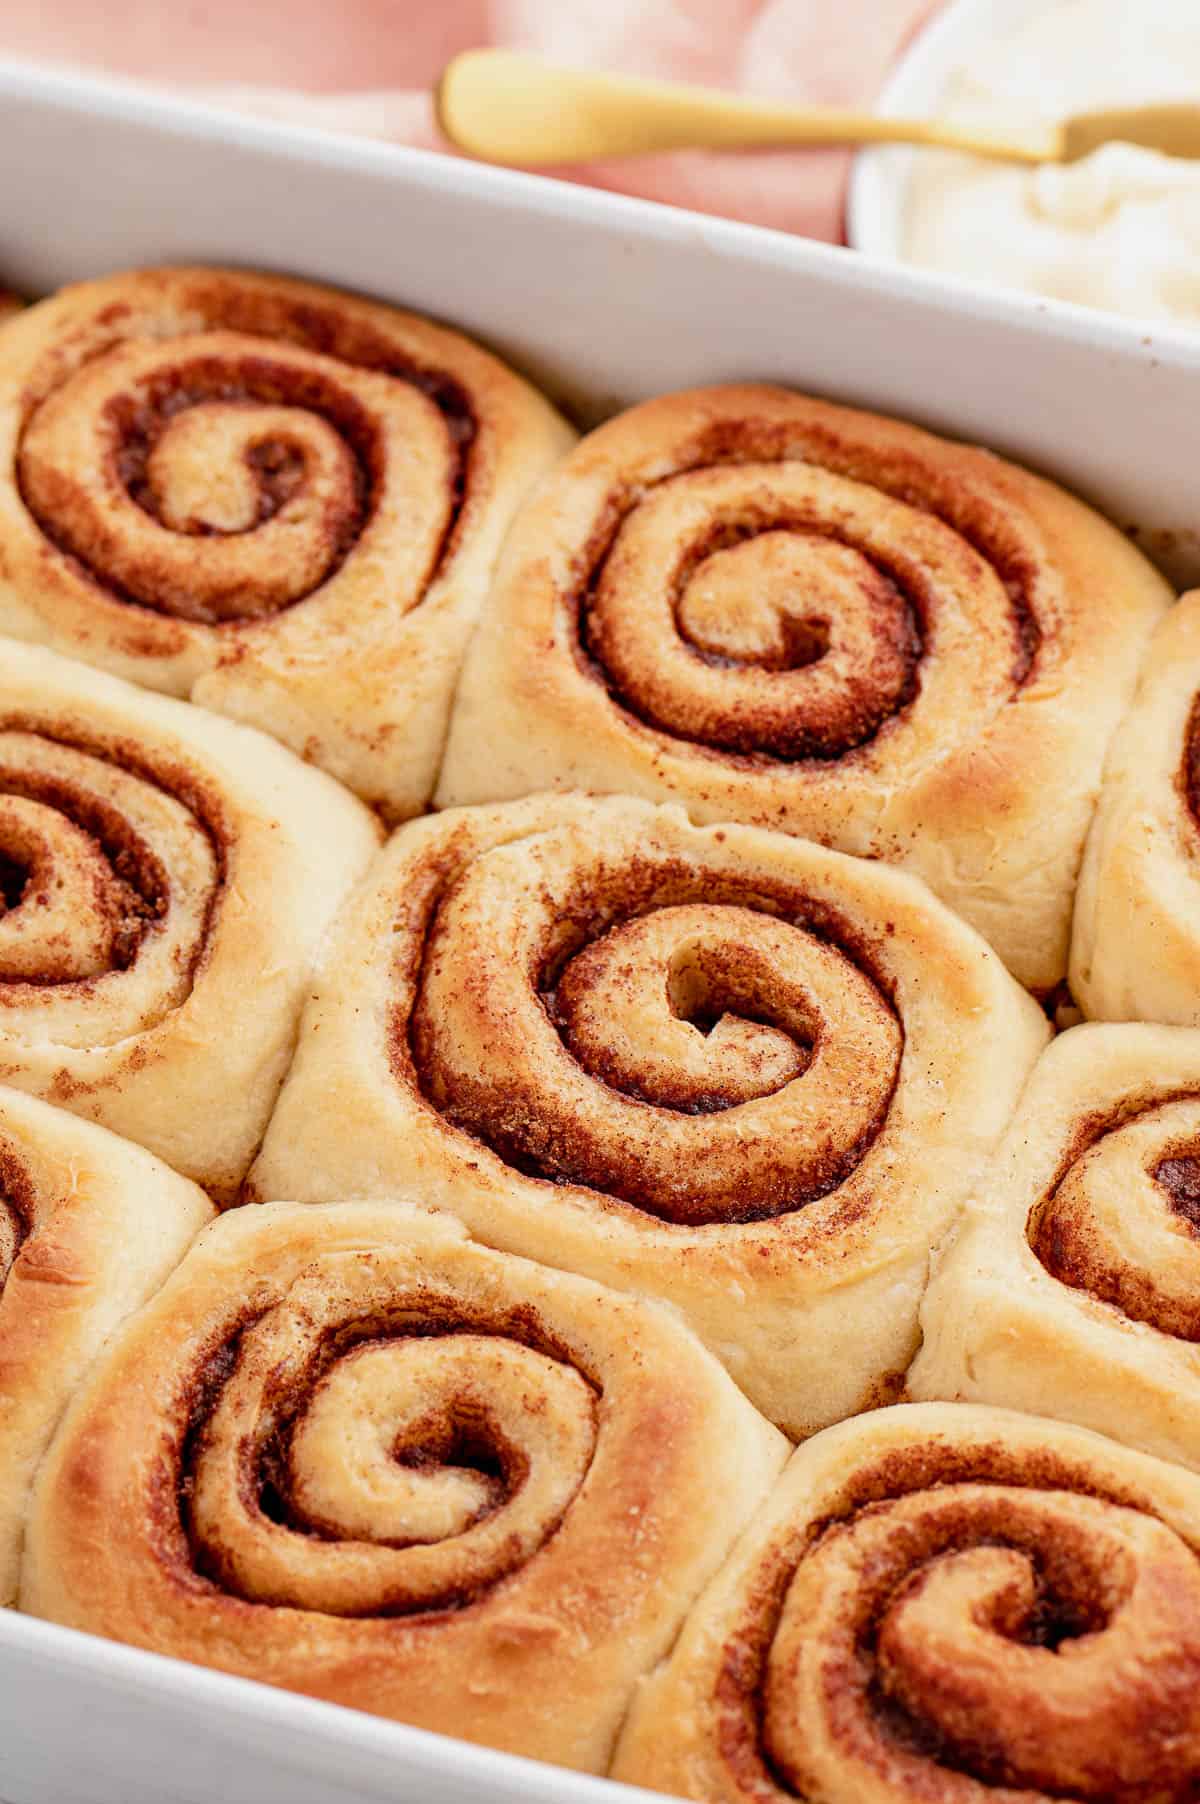 Baked, unfrosted overnight cinnamon rolls in a white baking dish.